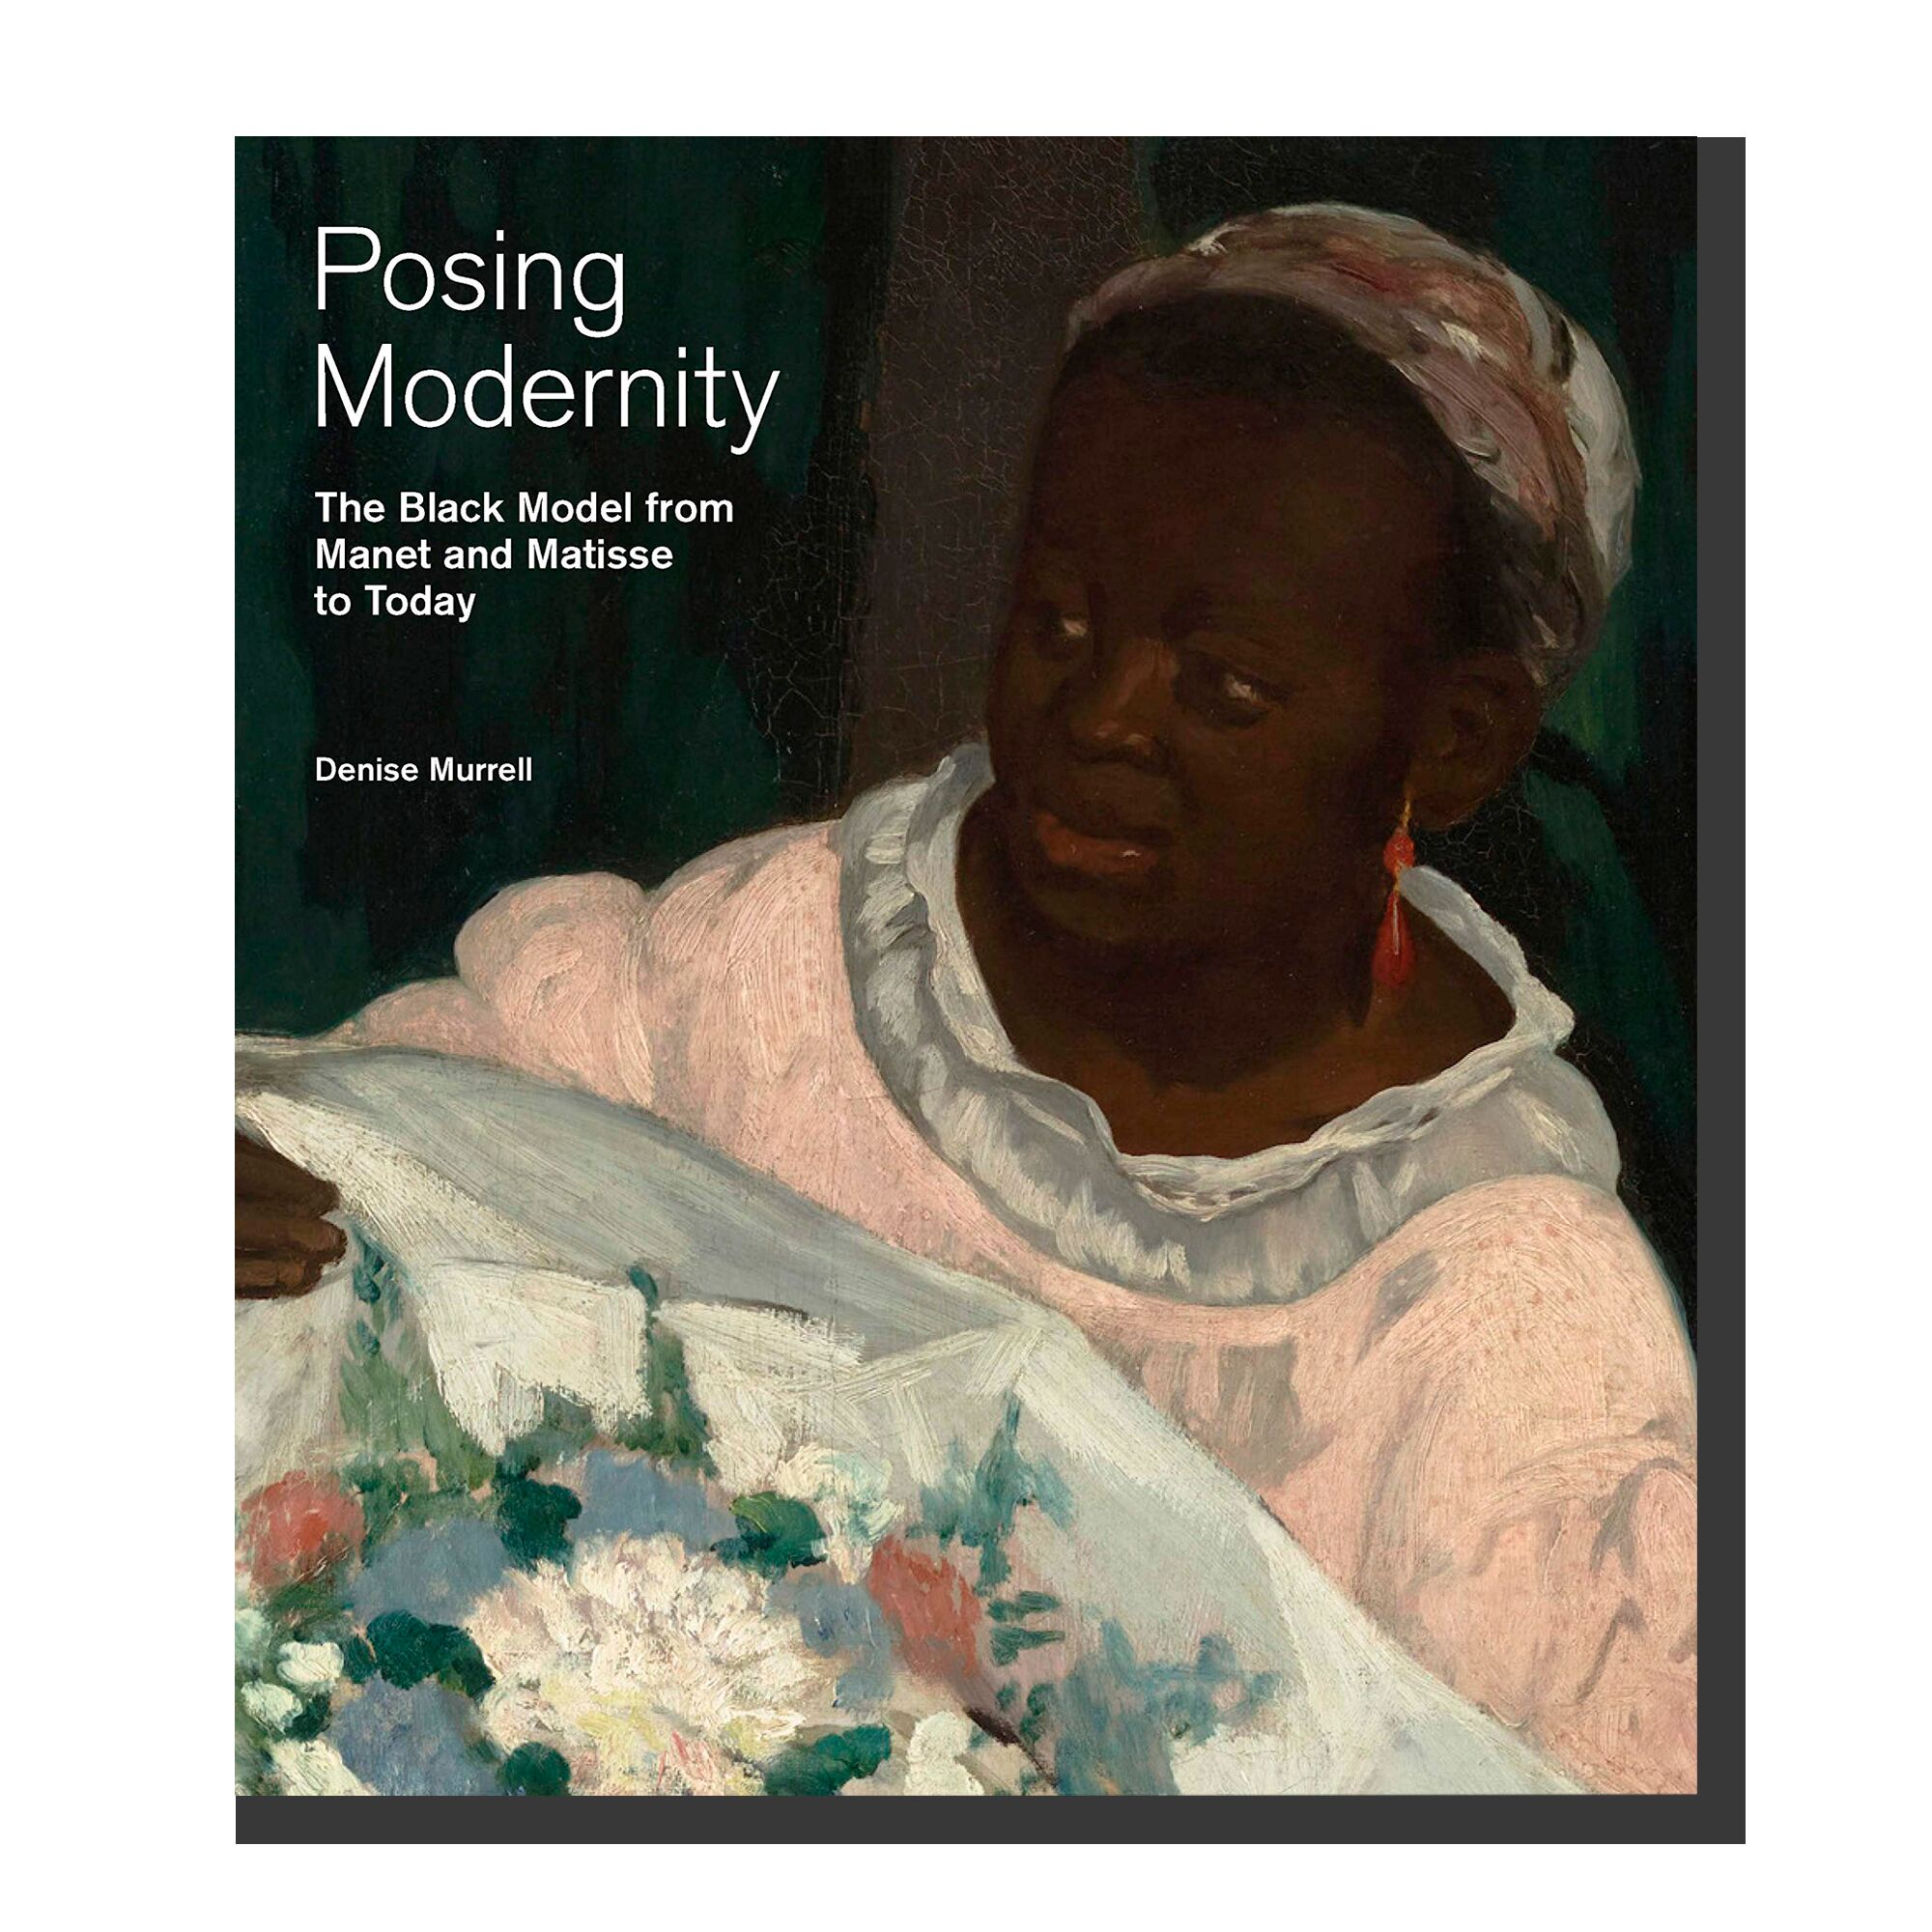 Posing Modernity: The Black Model from Manet and Matisse to Today